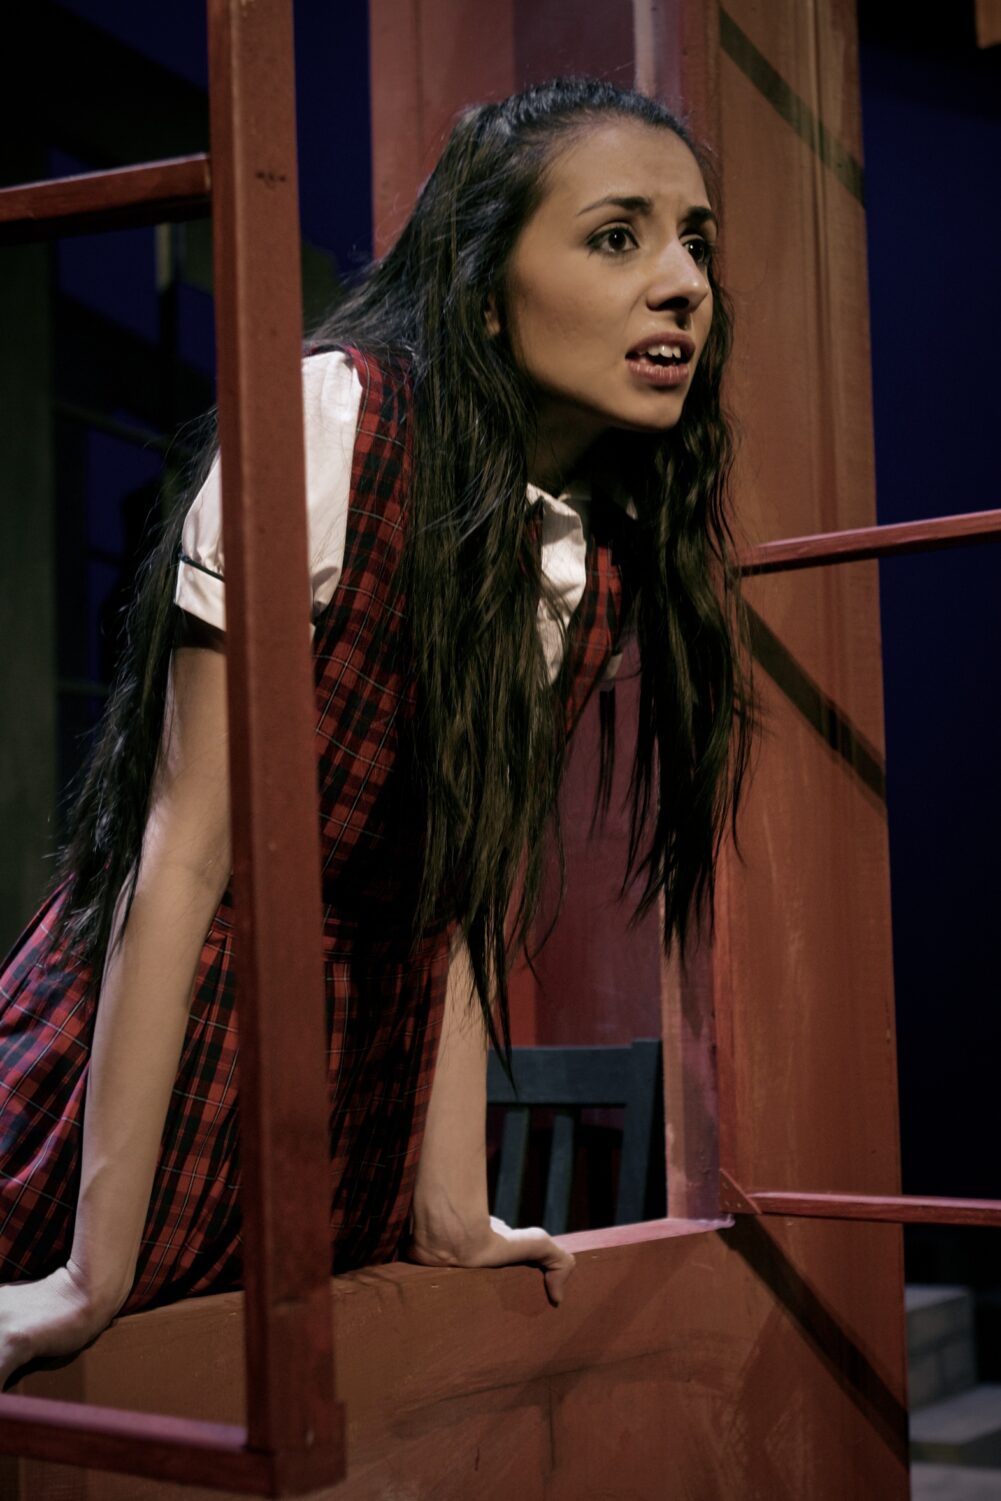 Photo by Fabián Aguirre from Cara Mía Theatre's 2011 production of "The House on Mango Street."